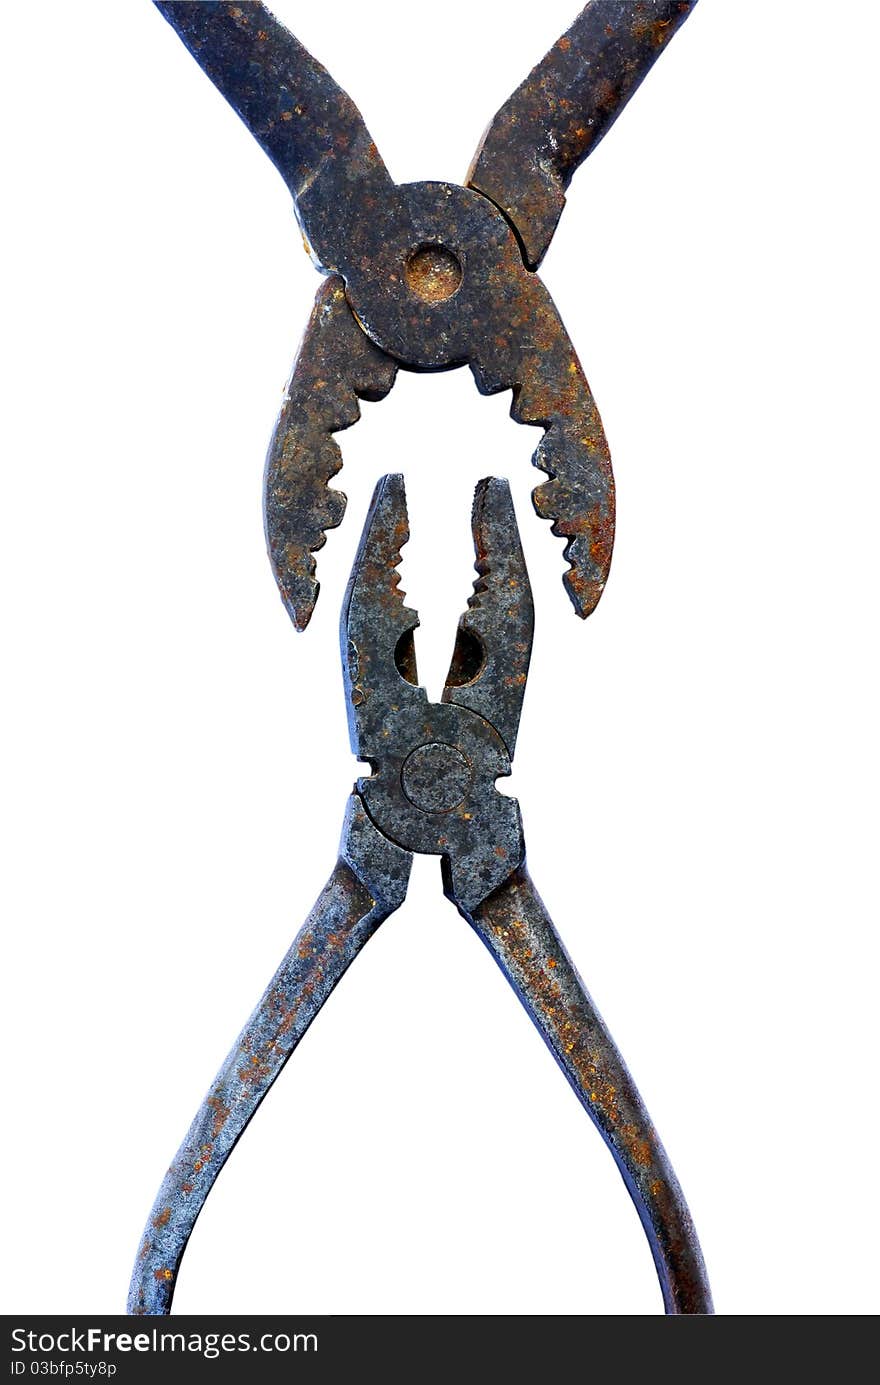 Old rusty tools, pliers, pincers, isolated on a white background